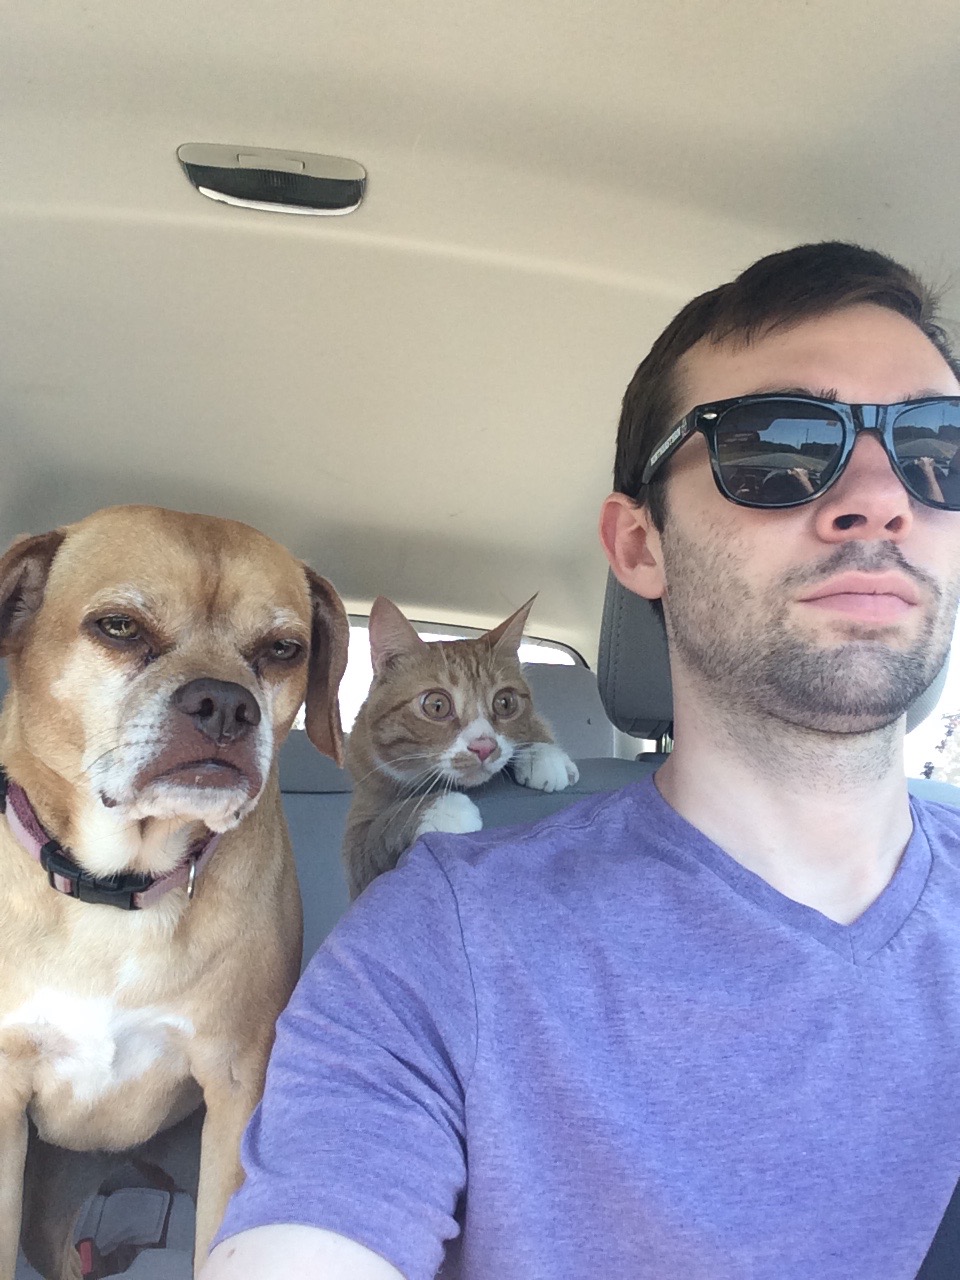 Road trip with two furry friends. The dog seems bored and the cat seems terrified.